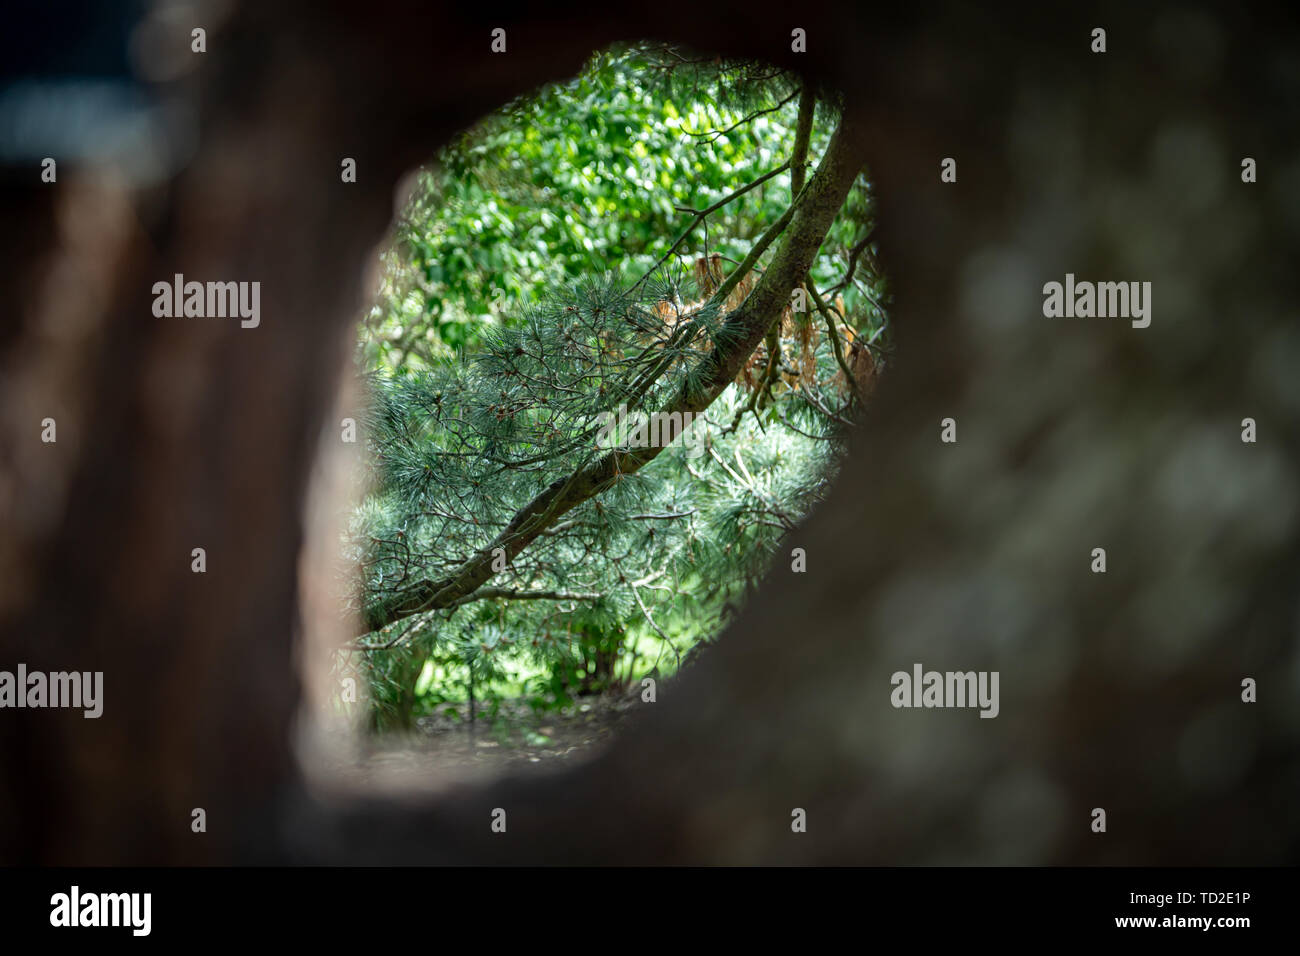 Looking through a hole in a pine tree to see the dark green of pine needles on branches in Kew Gardens, London. Stock Photo